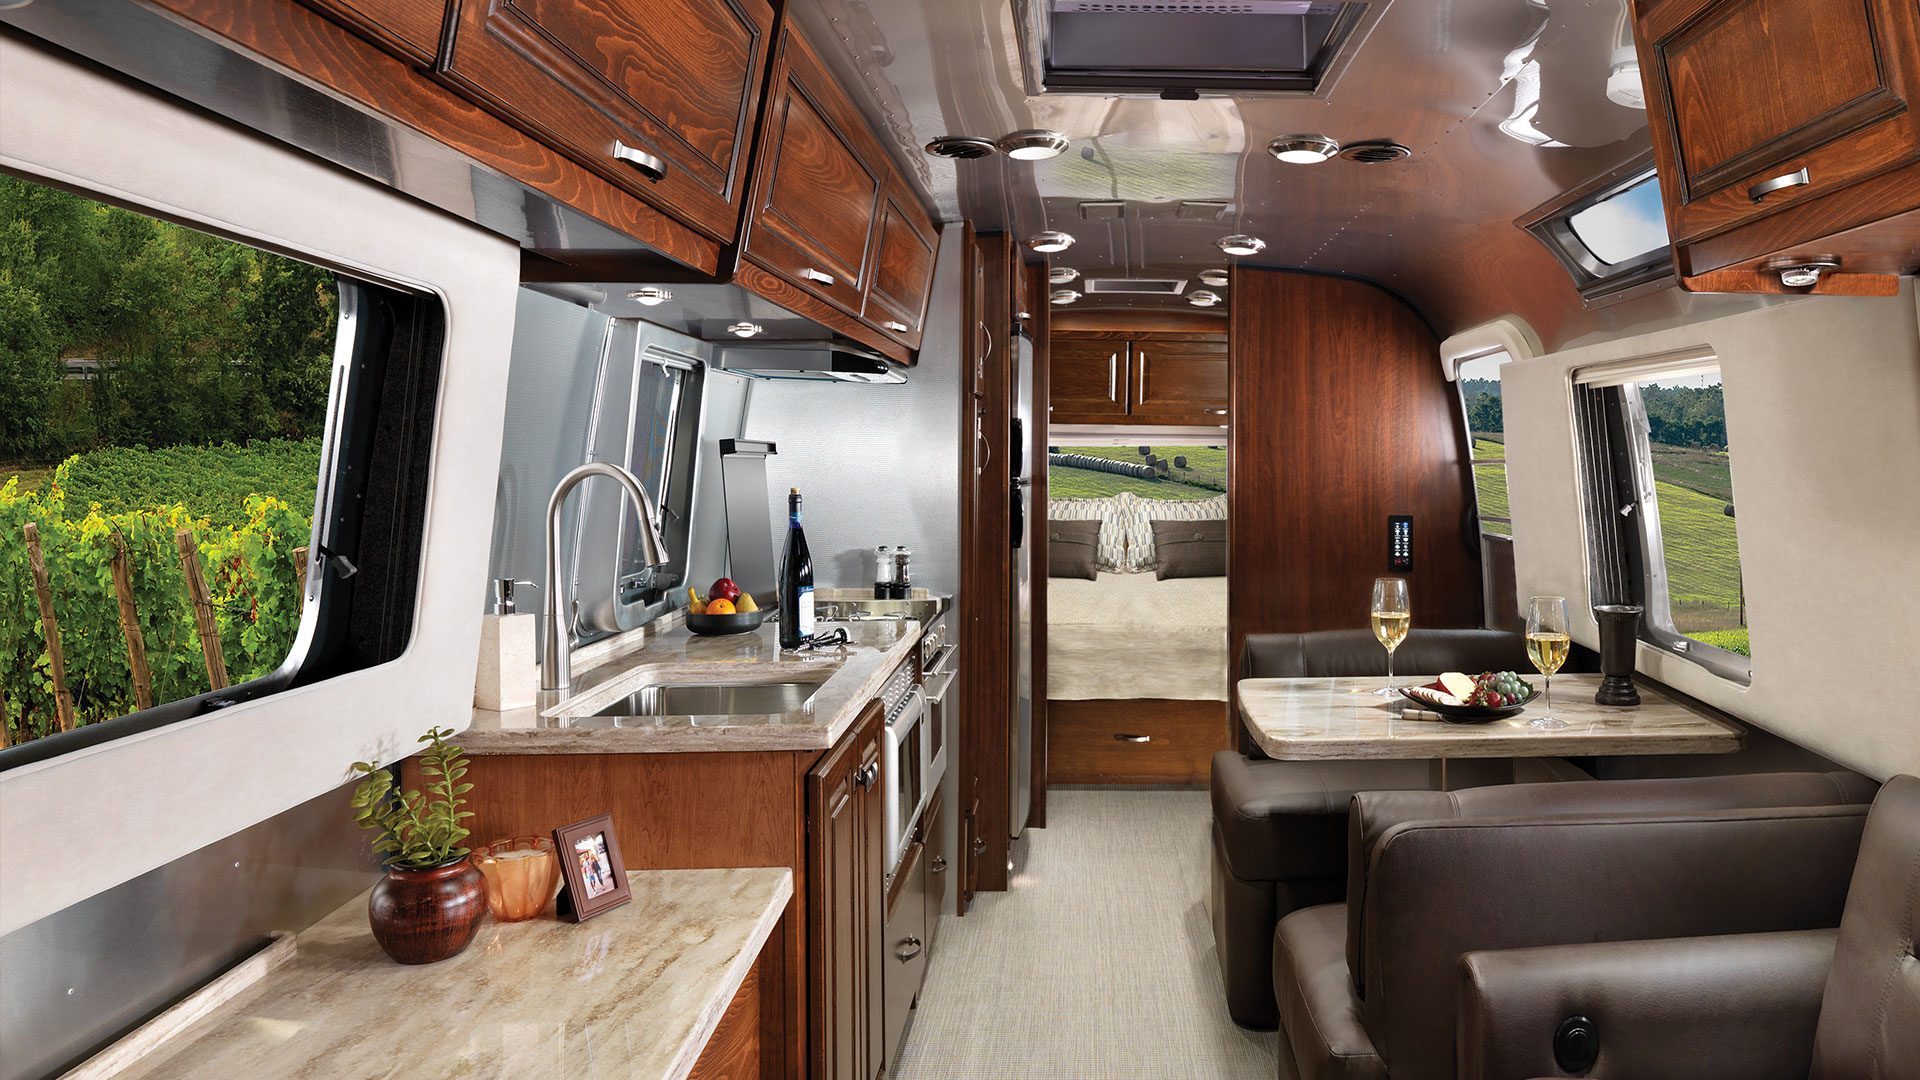 Gallery Classic Travel Trailers Airstream